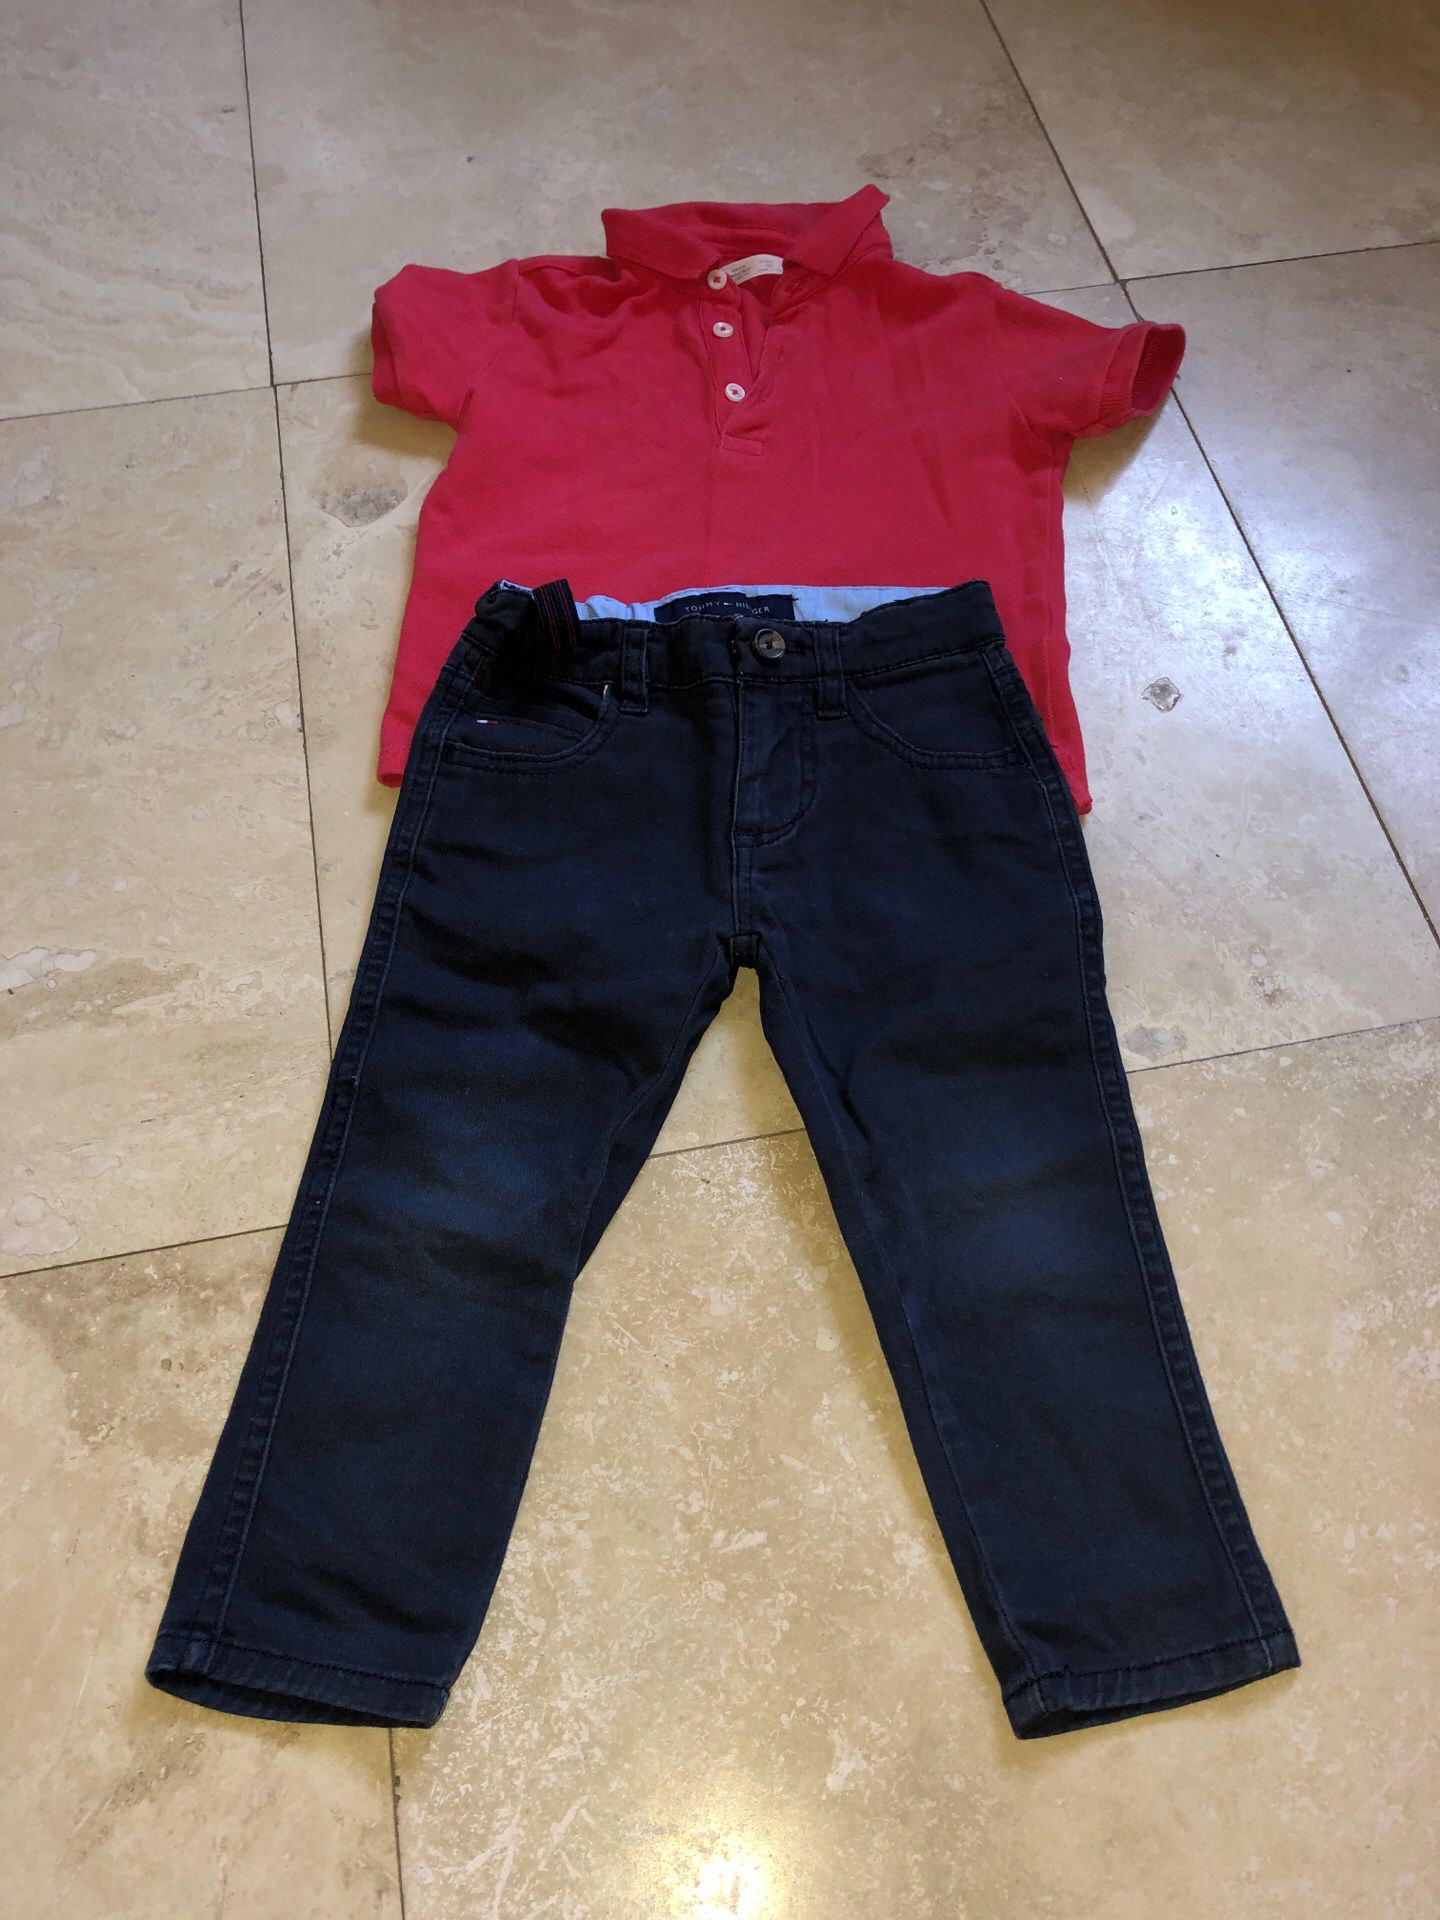 Boys pants and polo shirt size 2T Tommy Hilfiger pant